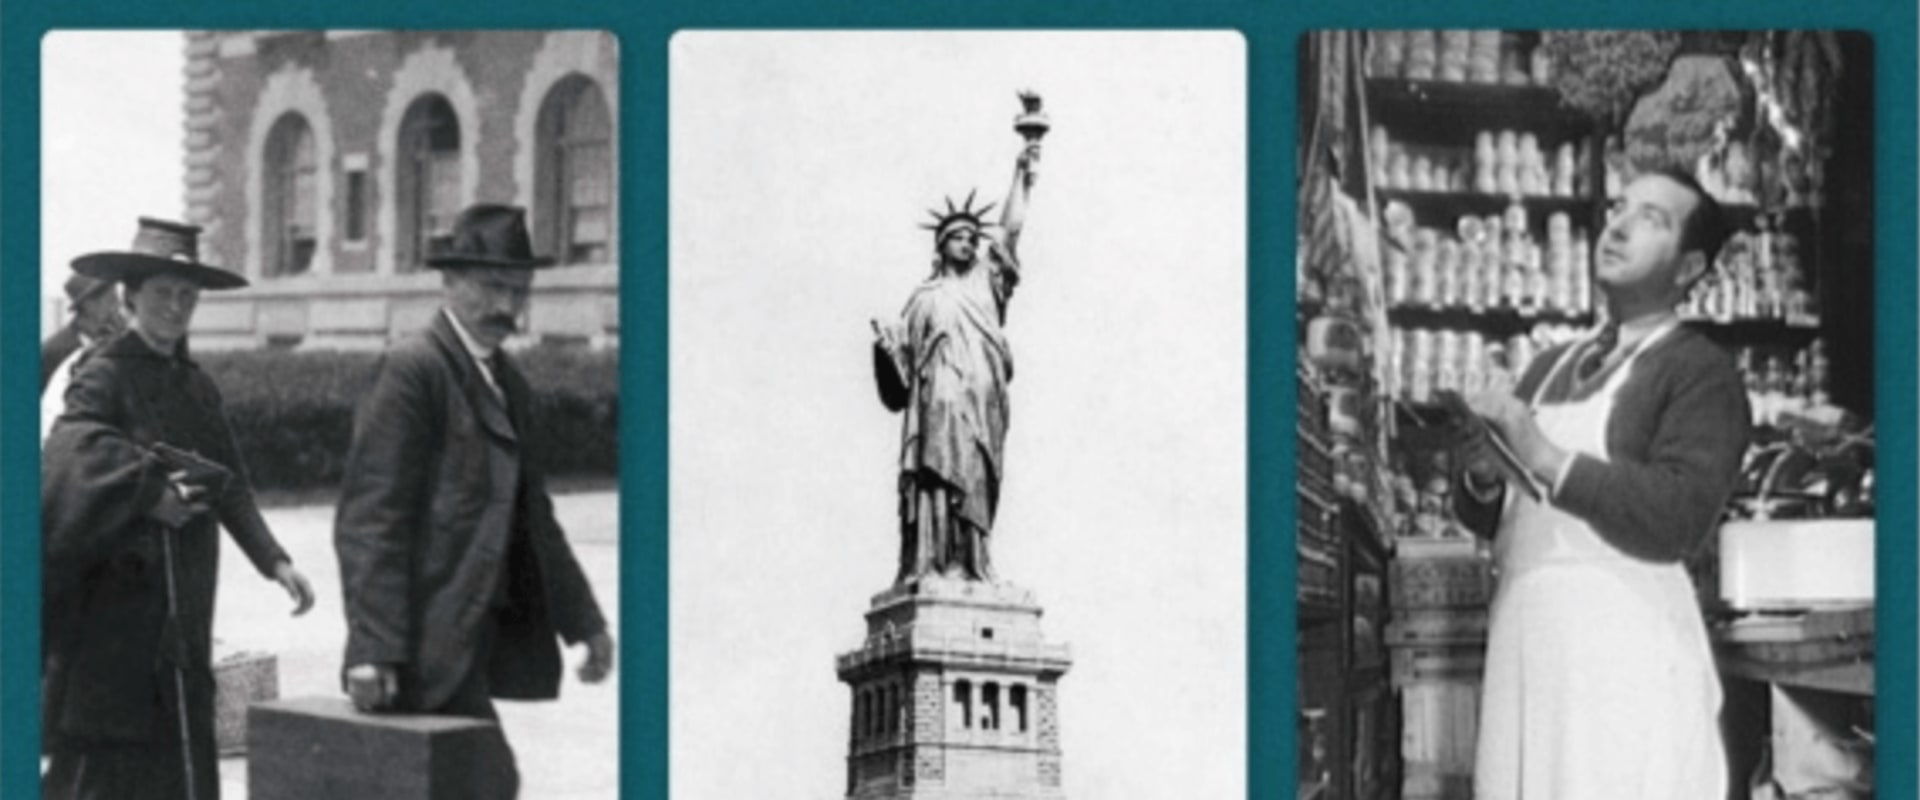 The Impact of Immigration on New York's Cultural Heritage